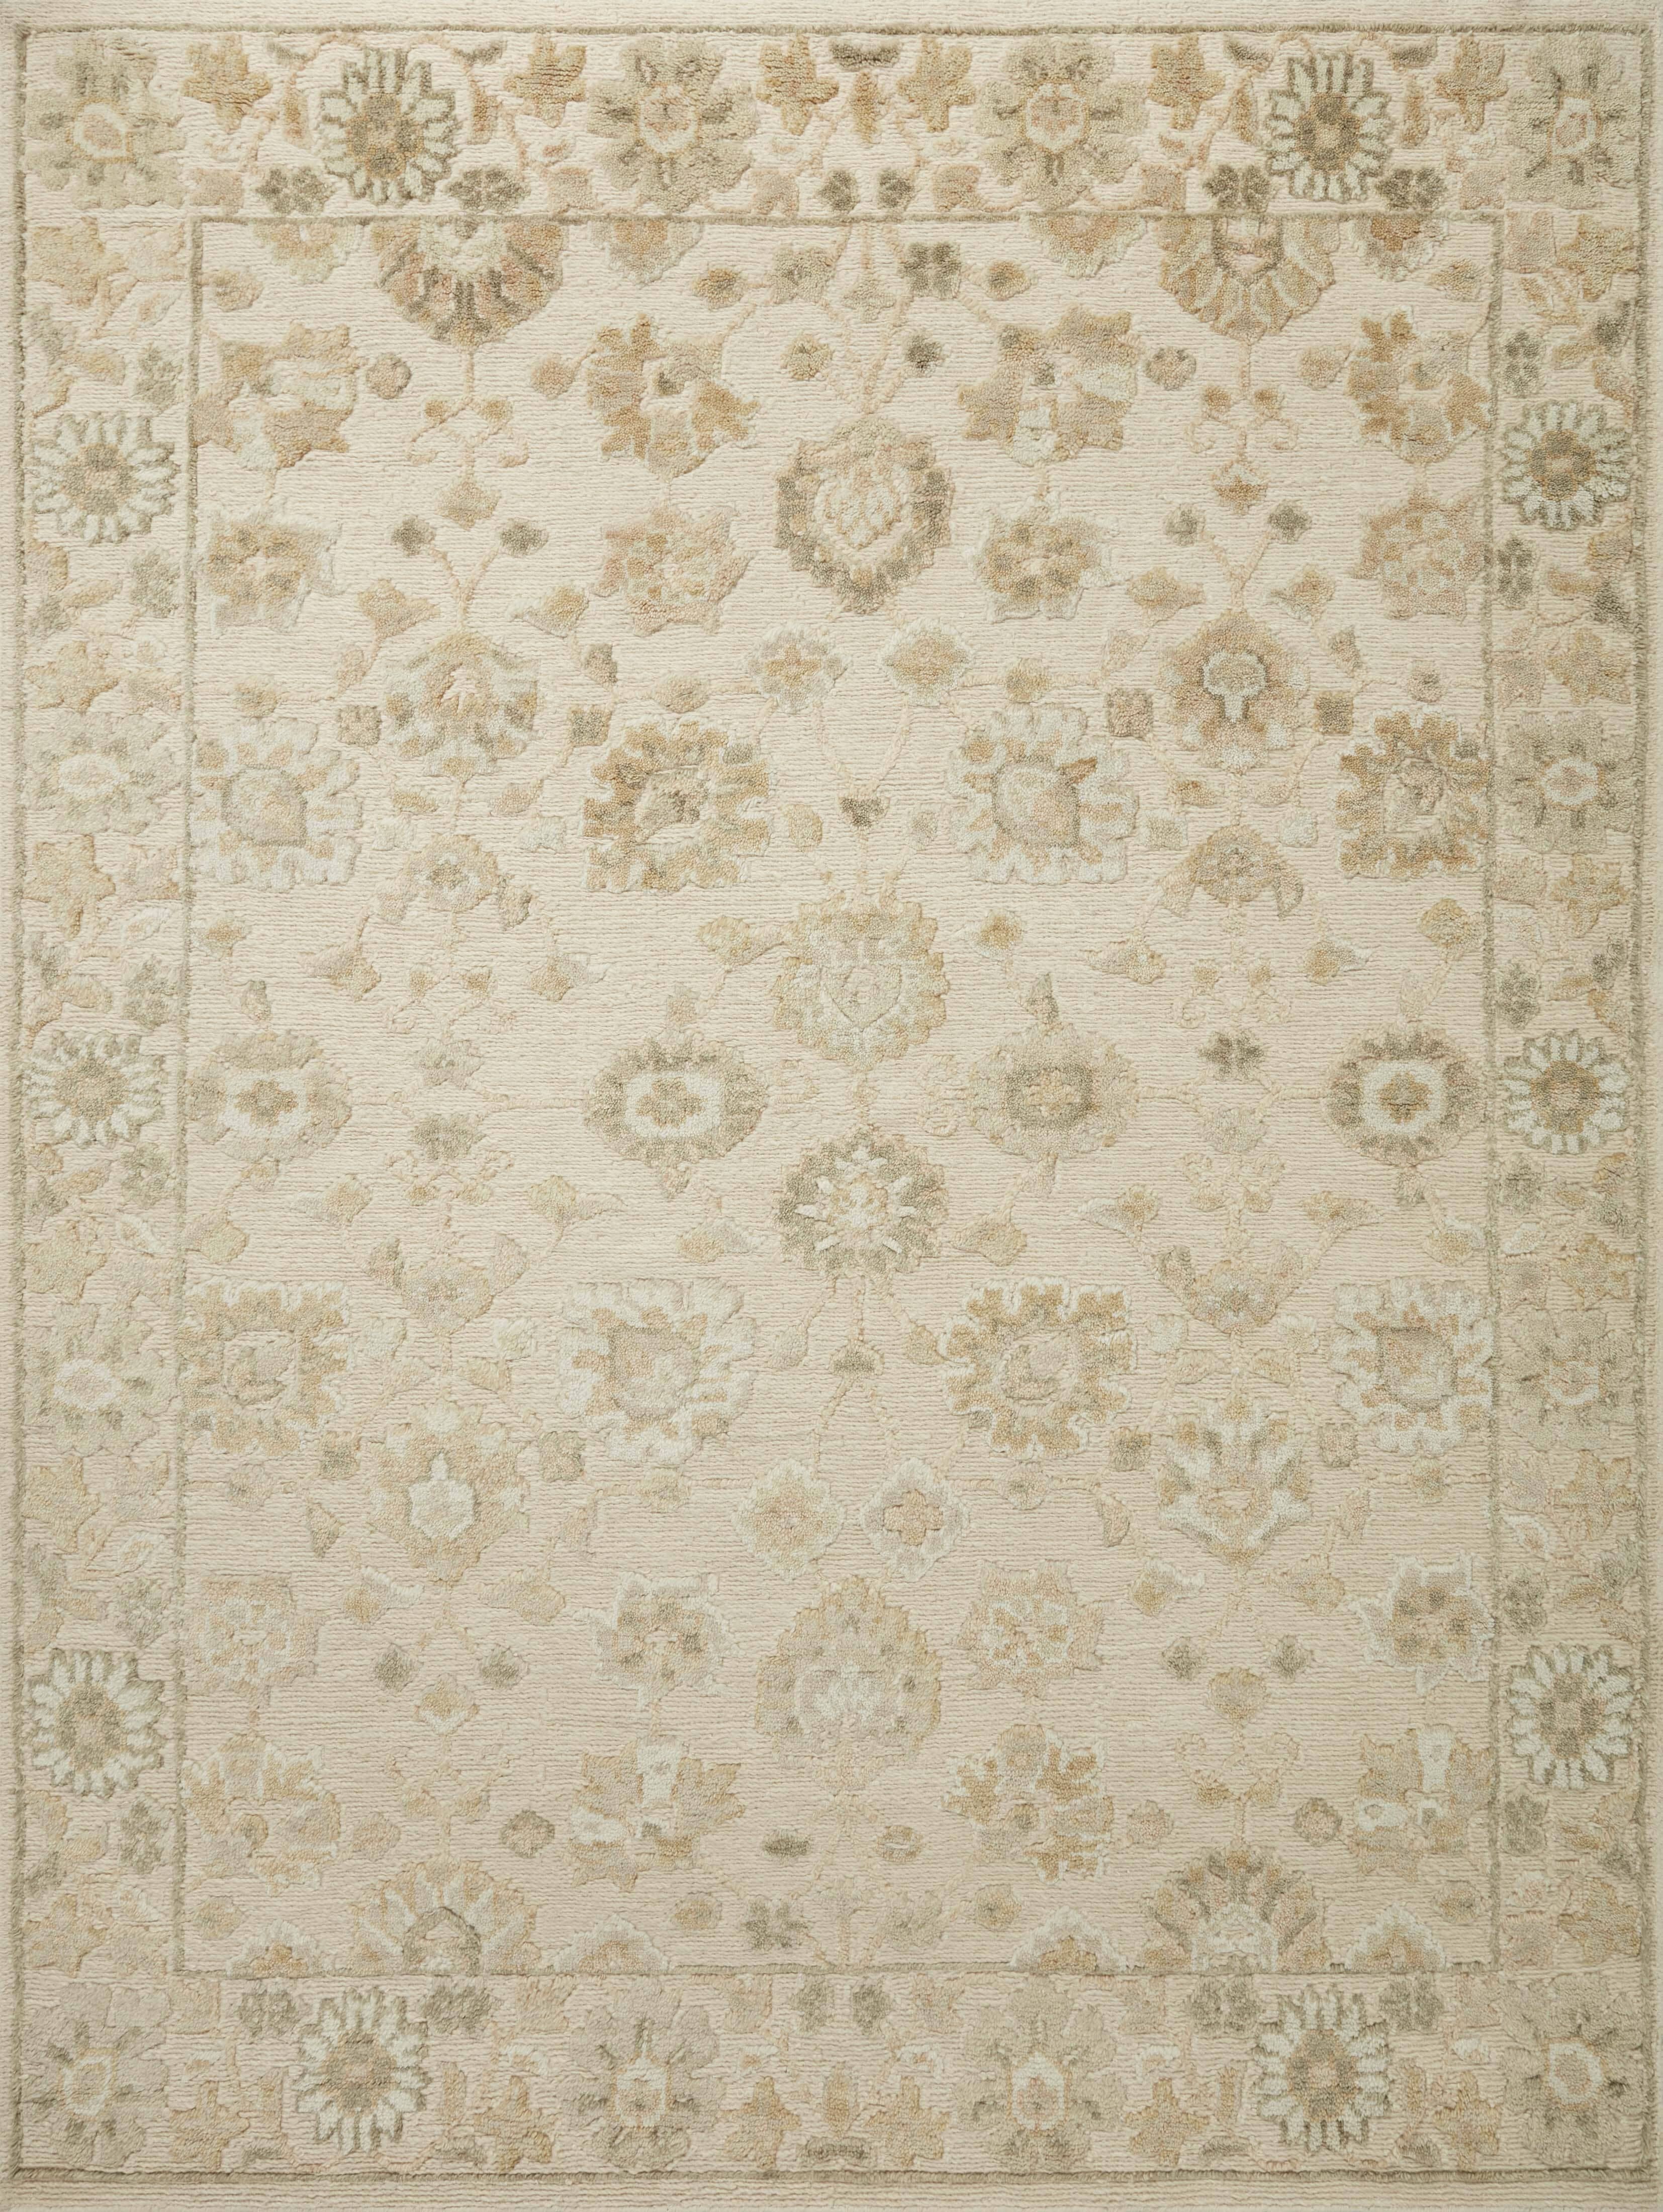 Magnolia Home by Joanna Gaines x Loloi, Ingrid Rug | Natural and Sage ING-02 RUG Magnolia Home by Joanna Gaines x Loloi